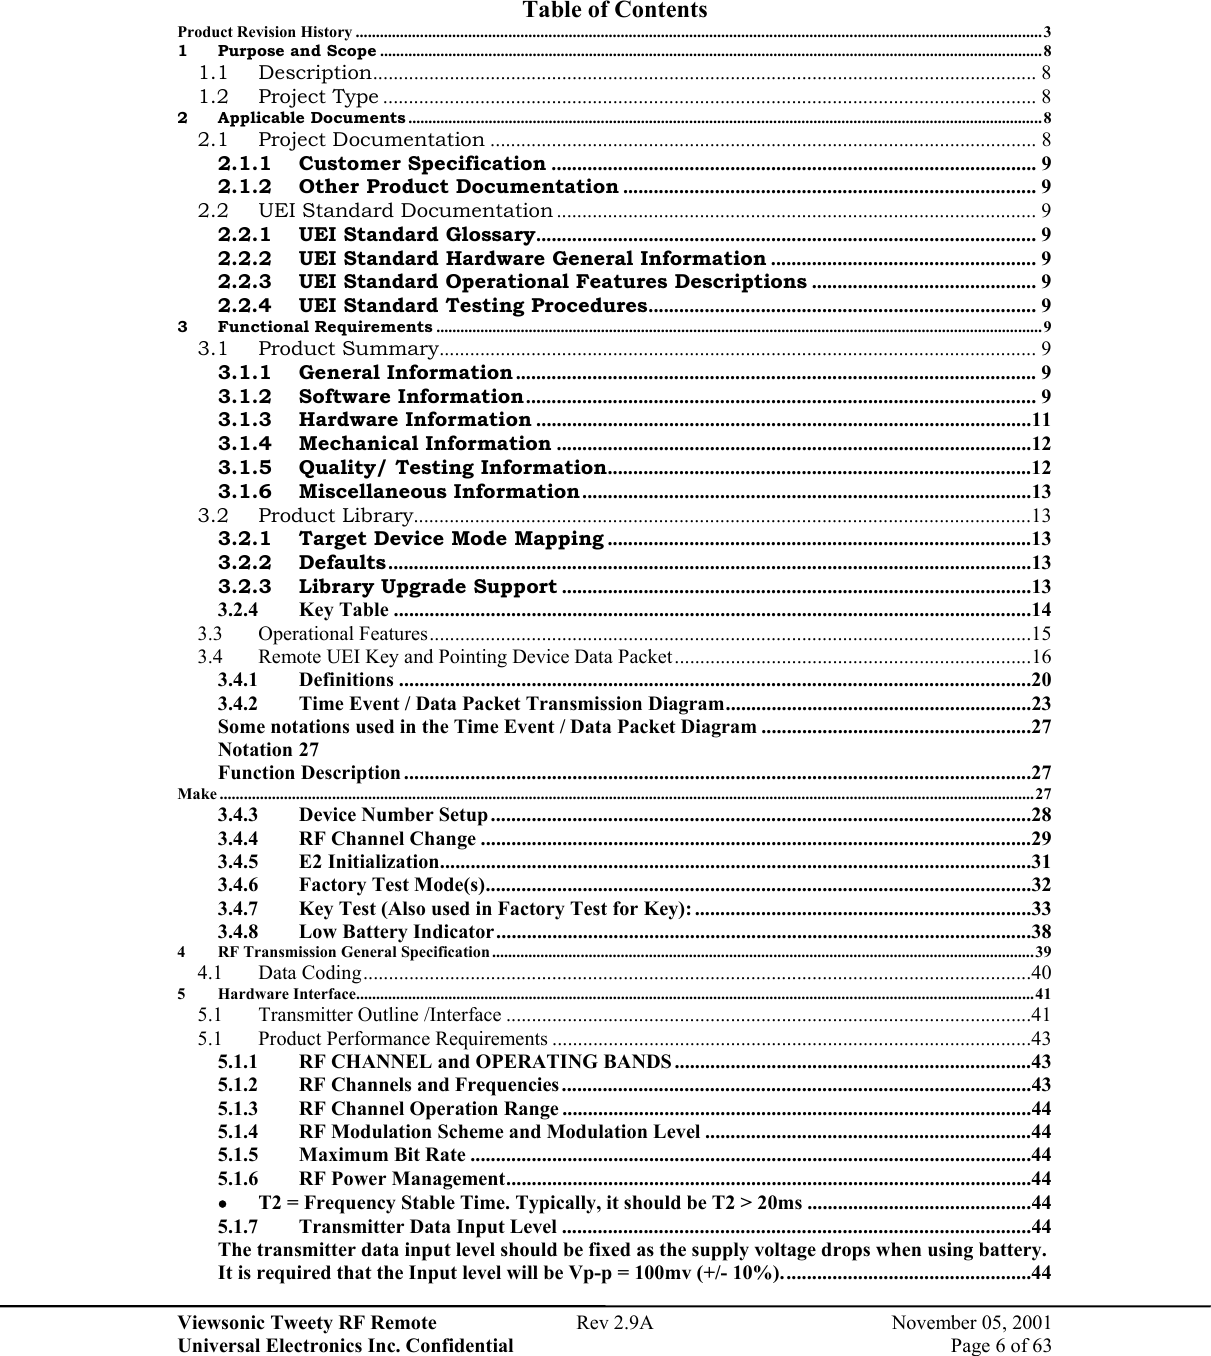 Viewsonic Tweety RF Remote  Rev 2.9A  November 05, 2001 Universal Electronics Inc. Confidential    Page 6 of 63  Table of Contents Product Revision History ...........................................................................................................................................................................3 1 Purpose and Scope .....................................................................................................................................................................8 1.1 Description.................................................................................................................................. 8 1.2 Project Type ................................................................................................................................8 2 Applicable Documents ..............................................................................................................................................................8 2.1 Project Documentation ........................................................................................................... 8 2.1.1 Customer Specification ............................................................................................... 9 2.1.2 Other Product Documentation ................................................................................. 9 2.2 UEI Standard Documentation .............................................................................................. 9 2.2.1 UEI Standard Glossary.................................................................................................. 9 2.2.2 UEI Standard Hardware General Information .................................................... 9 2.2.3 UEI Standard Operational Features Descriptions ............................................ 9 2.2.4 UEI Standard Testing Procedures............................................................................ 9 3 Functional Requirements ....................................................................................................................................................... 9 3.1 Product Summary..................................................................................................................... 9 3.1.1 General Information ...................................................................................................... 9 3.1.2 Software Information.................................................................................................... 9 3.1.3 Hardware Information .................................................................................................11 3.1.4 Mechanical Information .............................................................................................12 3.1.5 Quality/ Testing Information...................................................................................12 3.1.6 Miscellaneous Information ........................................................................................13 3.2 Product Library.........................................................................................................................13 3.2.1 Target Device Mode Mapping ...................................................................................13 3.2.2 Defaults..............................................................................................................................13 3.2.3 Library Upgrade Support ............................................................................................13 3.2.4 Key Table .............................................................................................................................14 3.3 Operational Features......................................................................................................................15 3.4  Remote UEI Key and Pointing Device Data Packet......................................................................16 3.4.1 Definitions ............................................................................................................................20 3.4.2  Time Event / Data Packet Transmission Diagram............................................................23 Some notations used in the Time Event / Data Packet Diagram .....................................................27 Notation 27 Function Description ...........................................................................................................................27 Make ...........................................................................................................................................................................................................27 3.4.3 Device Number Setup..........................................................................................................28 3.4.4 RF Channel Change ............................................................................................................29 3.4.5 E2 Initialization....................................................................................................................31 3.4.6 Factory Test Mode(s)...........................................................................................................32 3.4.7  Key Test (Also used in Factory Test for Key): ..................................................................33 3.4.8  Low Battery Indicator.........................................................................................................38 4  RF Transmission General Specification .......................................................................................................................................39 4.1 Data Coding...................................................................................................................................40 5 Hardware Interface.........................................................................................................................................................................41 5.1 Transmitter Outline /Interface .......................................................................................................41 5.1  Product Performance Requirements ..............................................................................................43 5.1.1  RF CHANNEL and OPERATING BANDS......................................................................43 5.1.2  RF Channels and Frequencies ............................................................................................43 5.1.3  RF Channel Operation Range ............................................................................................44 5.1.4  RF Modulation Scheme and Modulation Level ................................................................44 5.1.5  Maximum Bit Rate ..............................................................................................................44 5.1.6  RF Power Management.......................................................................................................44 •  T2 = Frequency Stable Time. Typically, it should be T2 &gt; 20ms ............................................44 5.1.7  Transmitter Data Input Level ............................................................................................44 The transmitter data input level should be fixed as the supply voltage drops when using battery. It is required that the Input level will be Vp-p = 100mv (+/- 10%).................................................44 